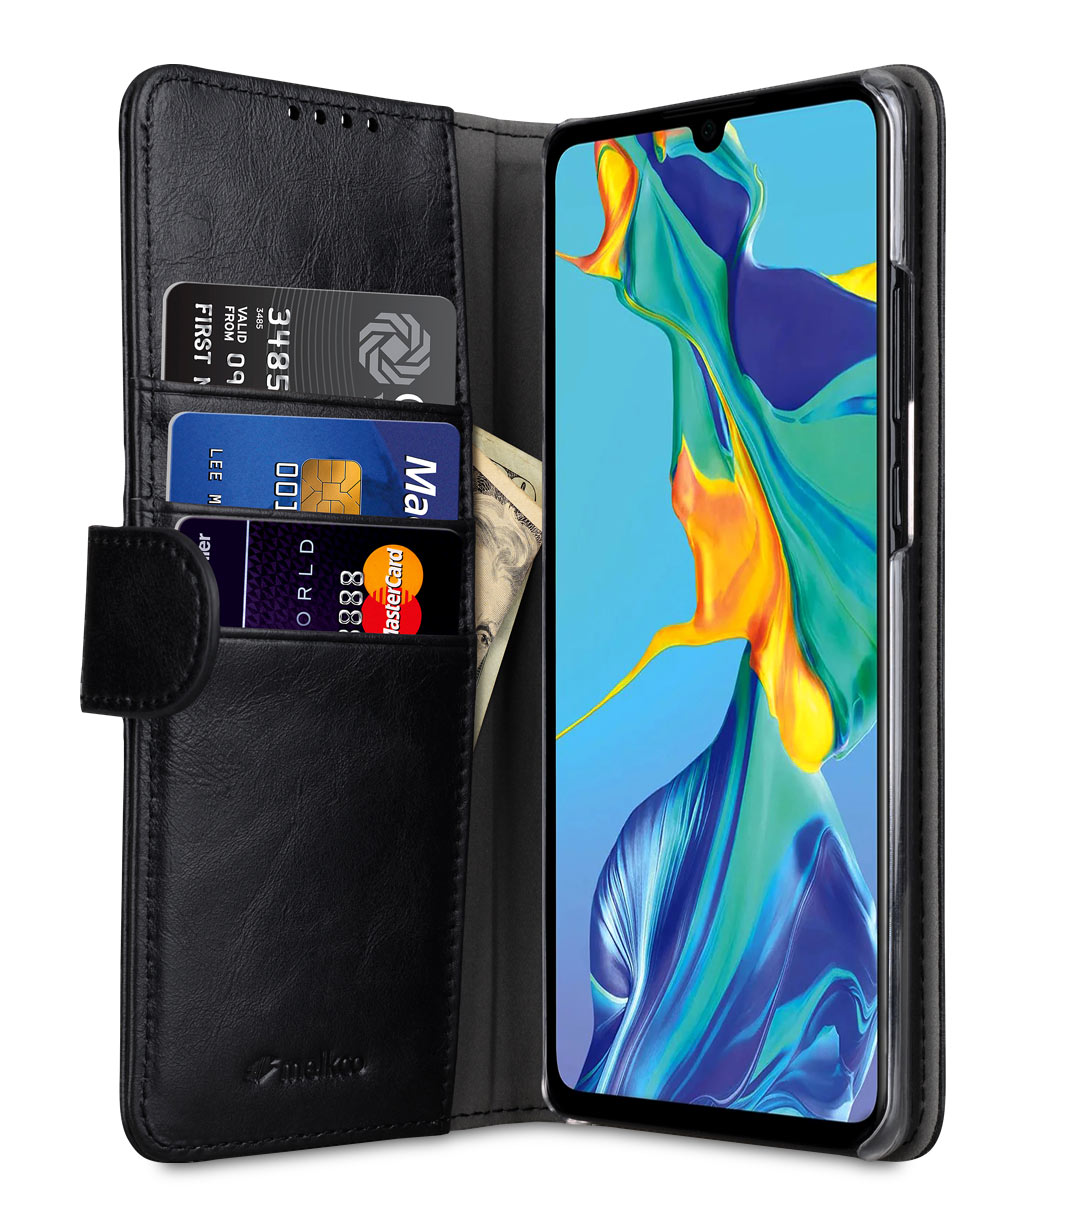 Melkco Wallet Book Series Premium Leather Wallet Book Clear Type Stand Case for Huawei P30 Pro - ( Black )